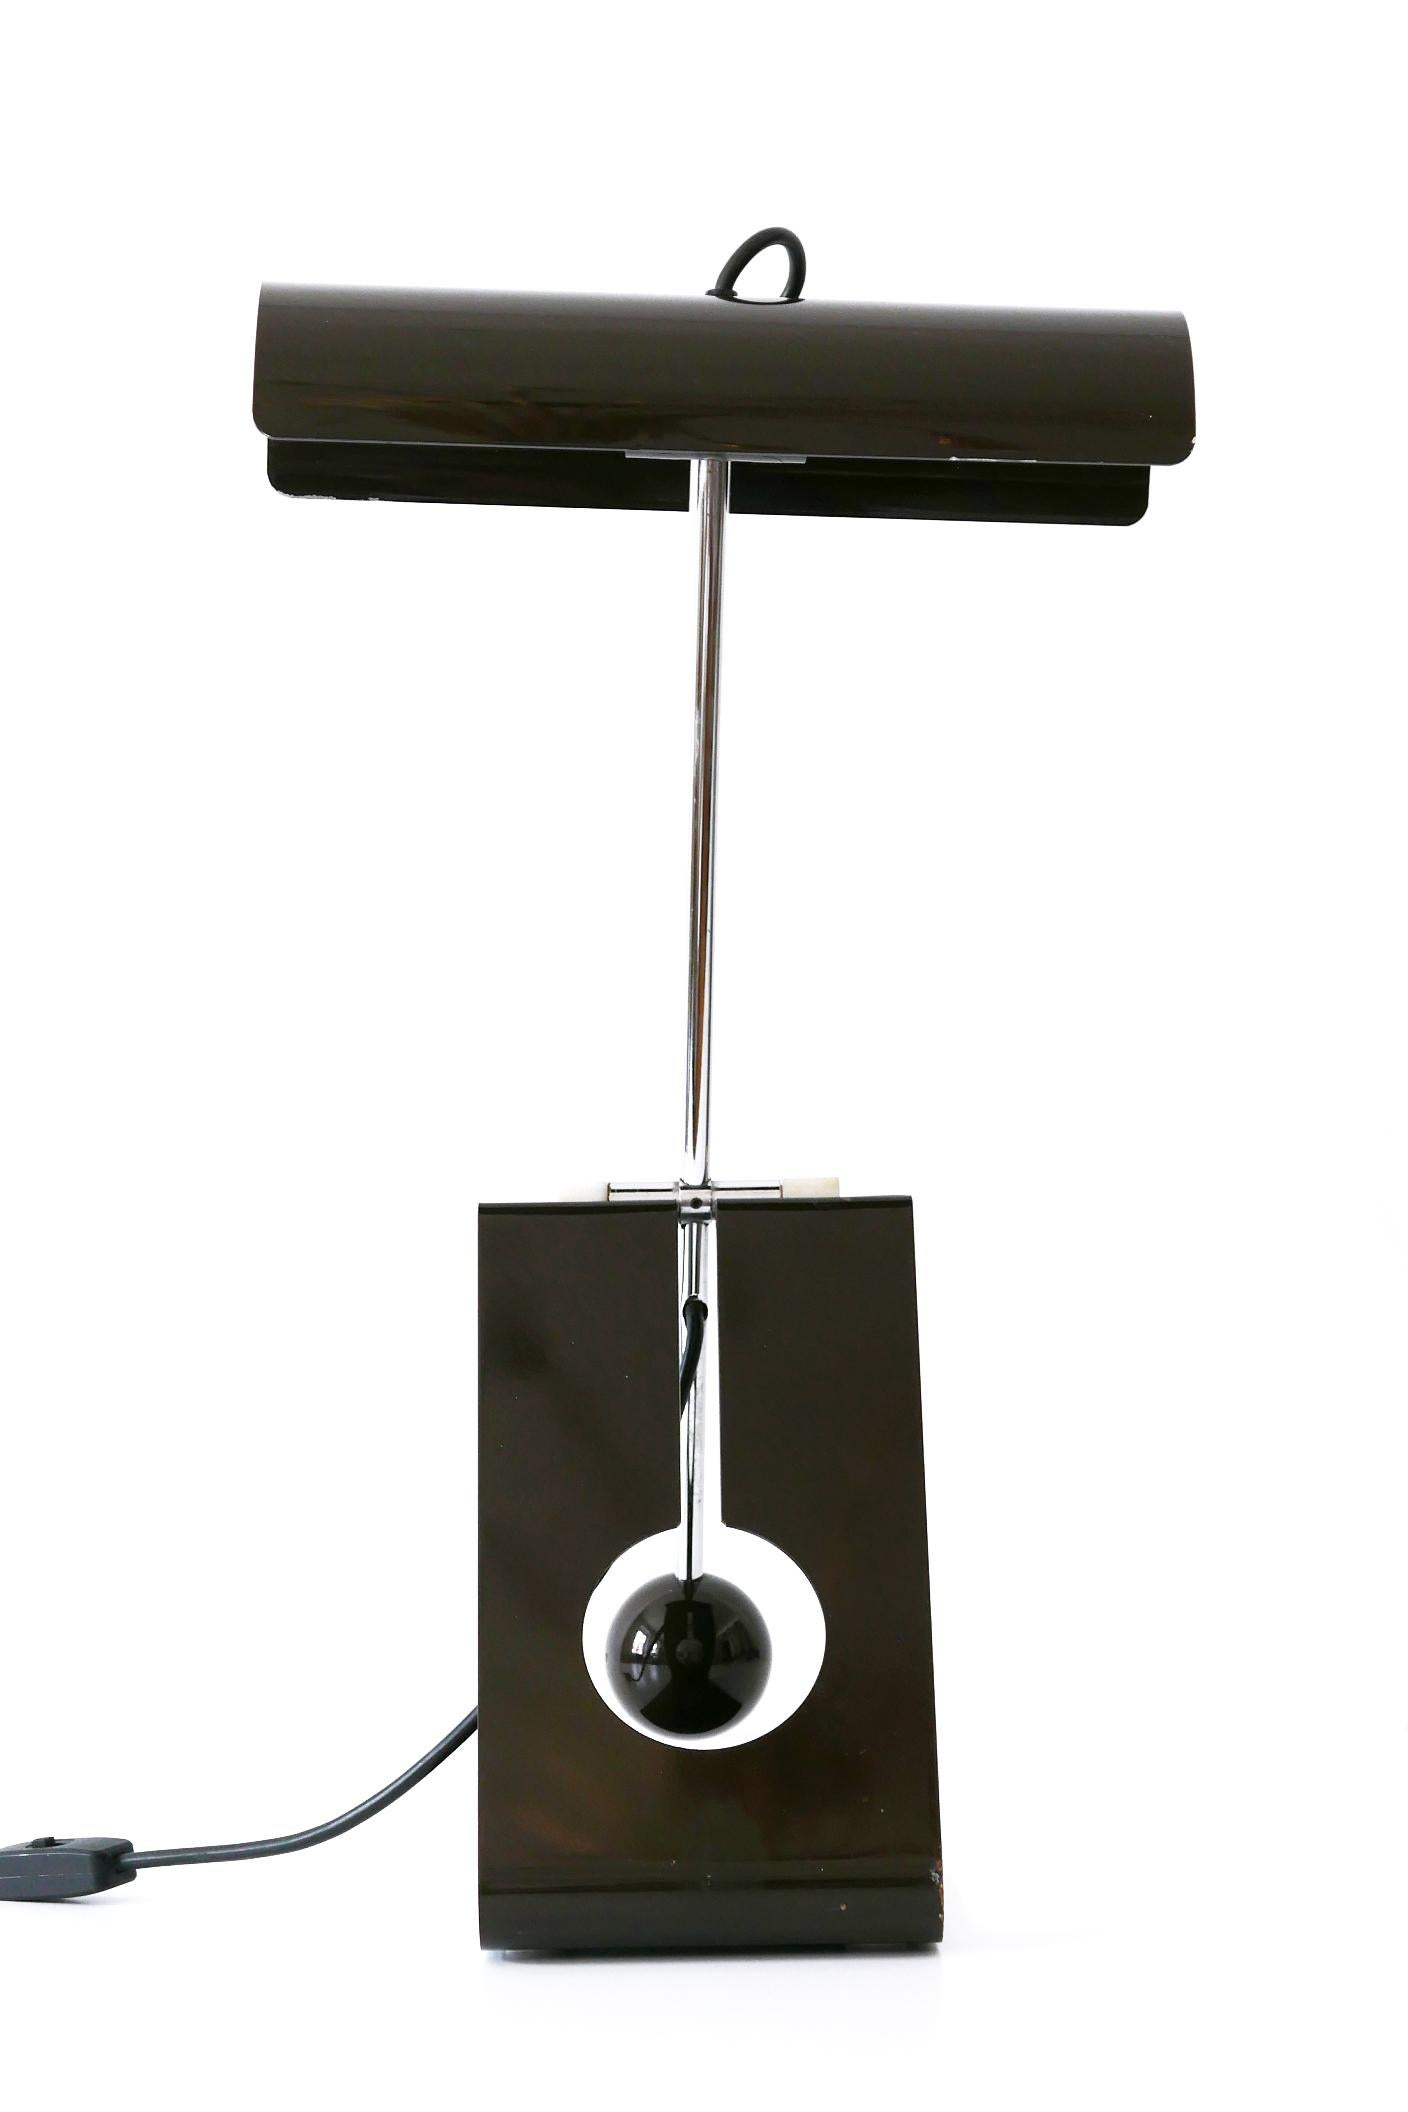 Articulated Table Lamp Picchio by Mauro Martini for Fratelli Martini 1970s Italy For Sale 10